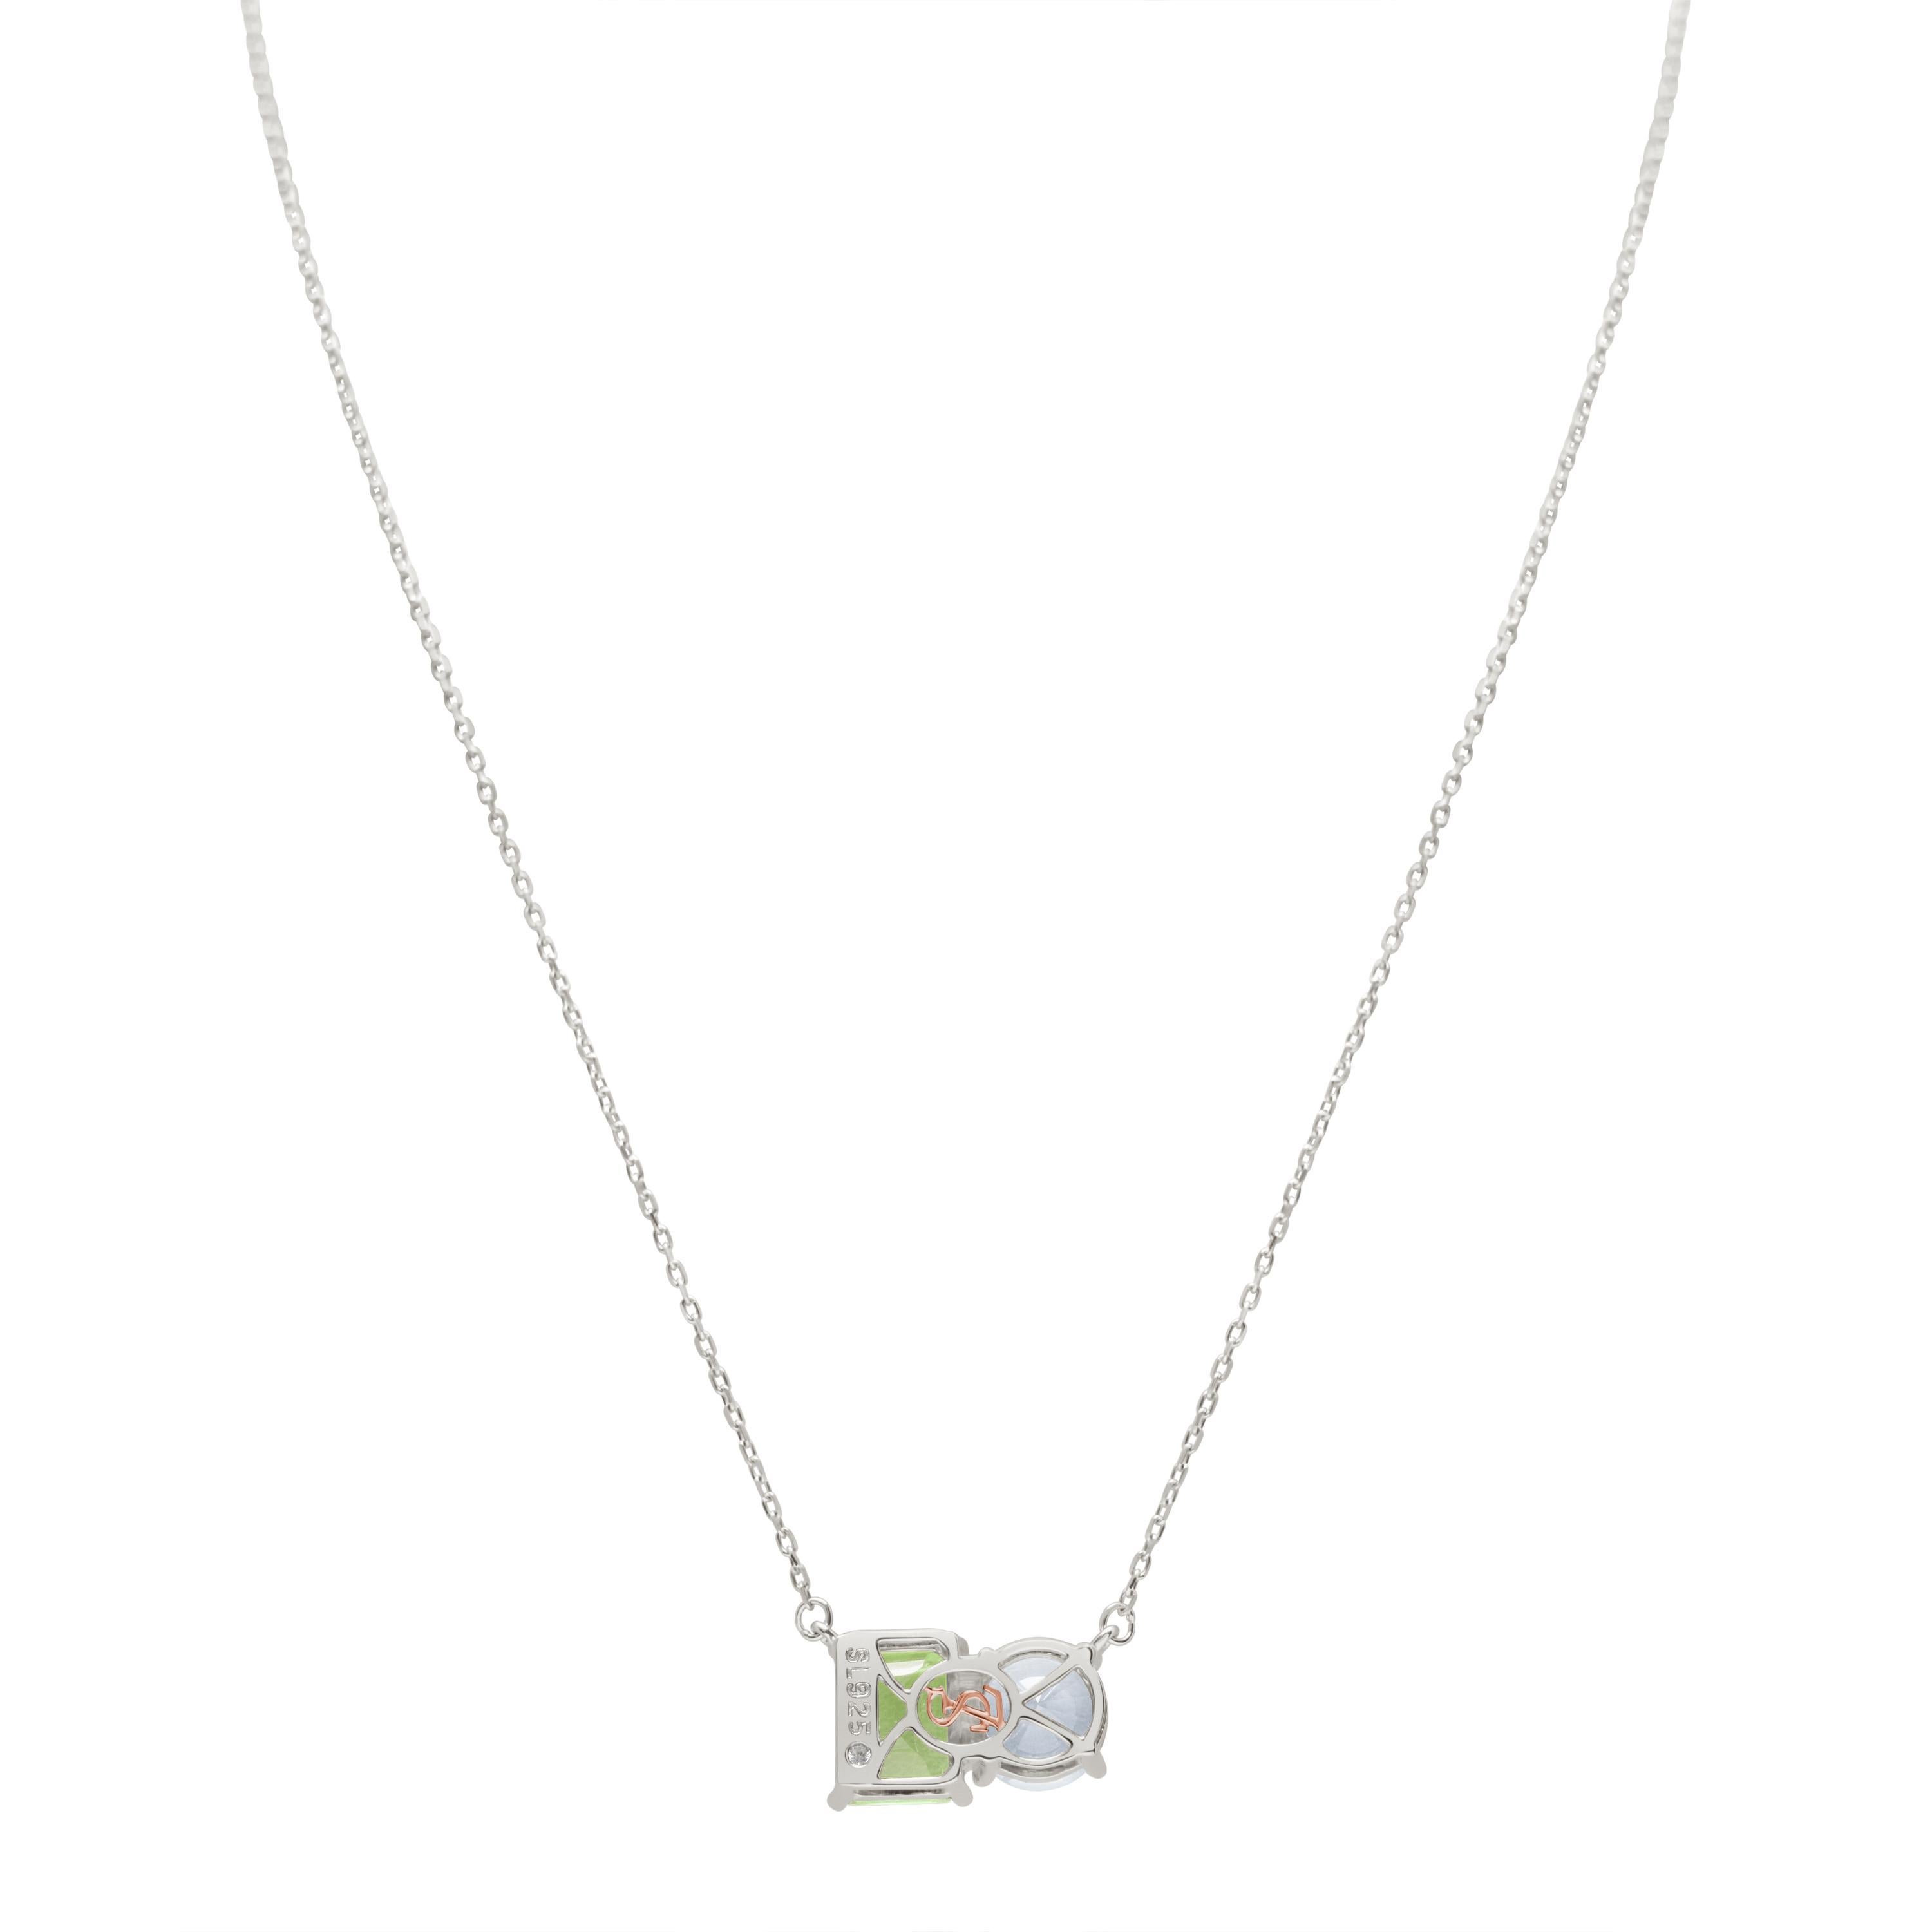 Shimmering in hues of white and green, this Suzy Levian Toi Et Moi necklace is as on trend as can be, and features a round cut white topaz and an emerald cut green amethyst as a perfectly matched pair. French for 